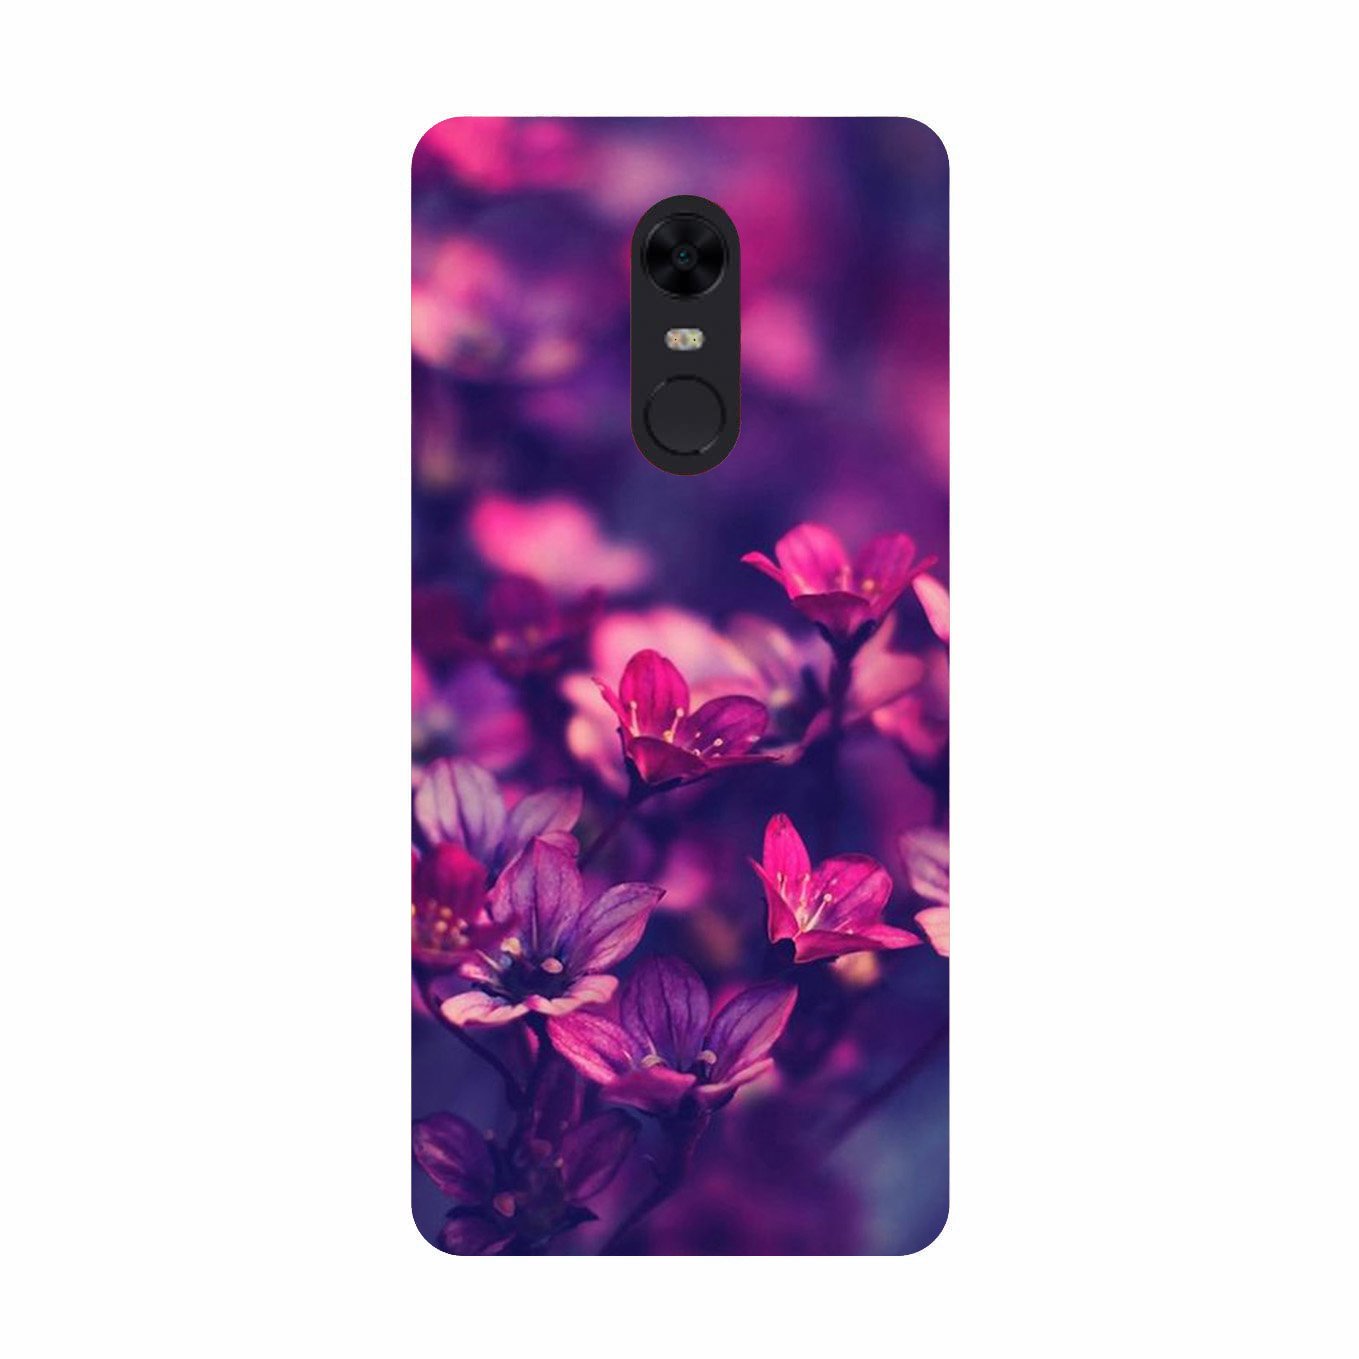 flowers Case for Redmi 5